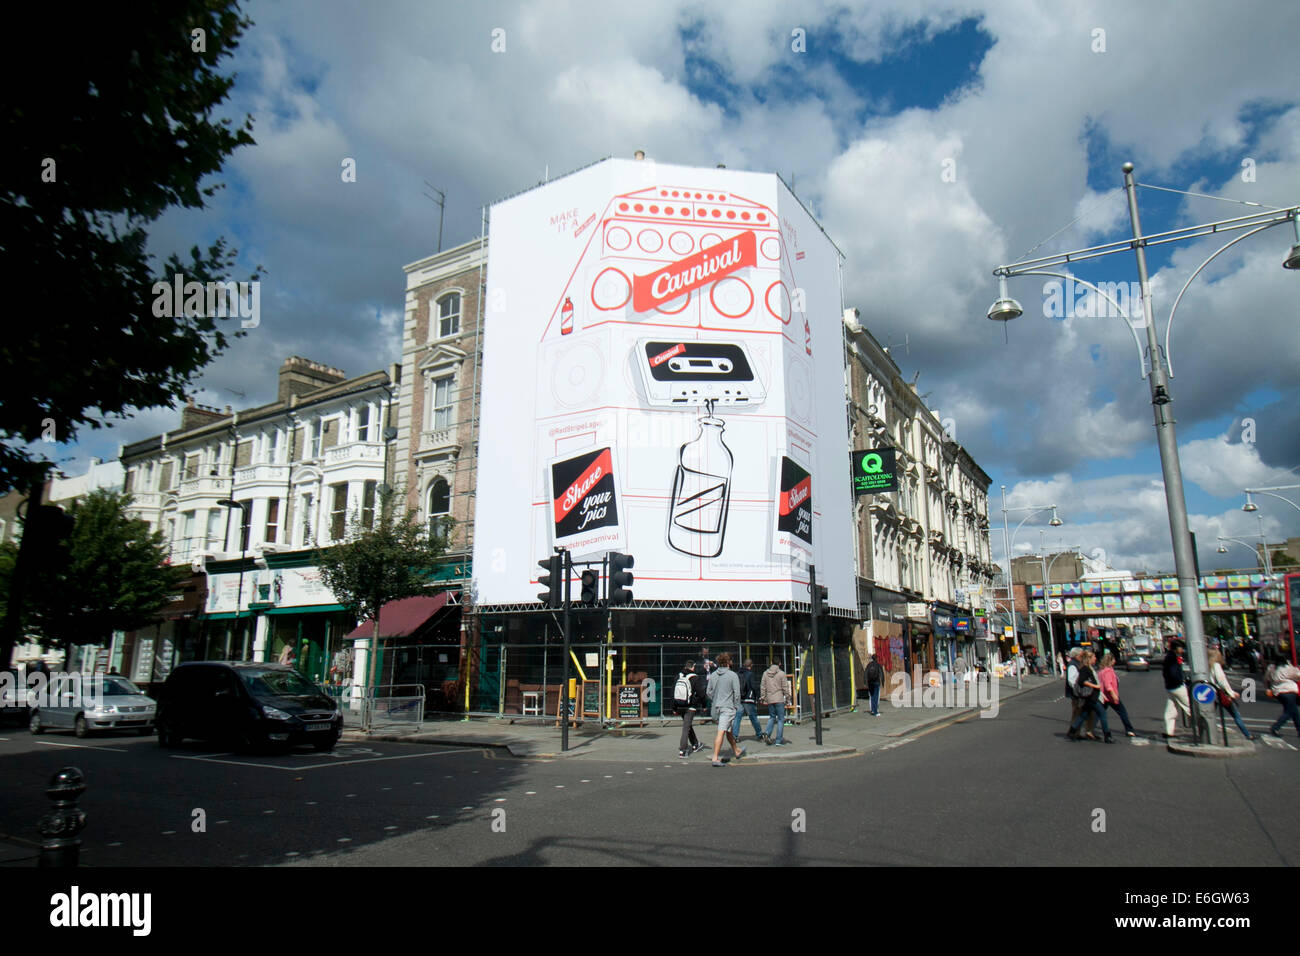 London,UK. 23rd August 2014. A giant billboard advertising Jamaican beer Red Stripe. Residents board up properties and shops ahead of the Notting Hill carnival the largest street festival in Europe which is expected to attract thousands of revellers over the bank holiday weekend Credit:  amer ghazzal/Alamy Live News Stock Photo